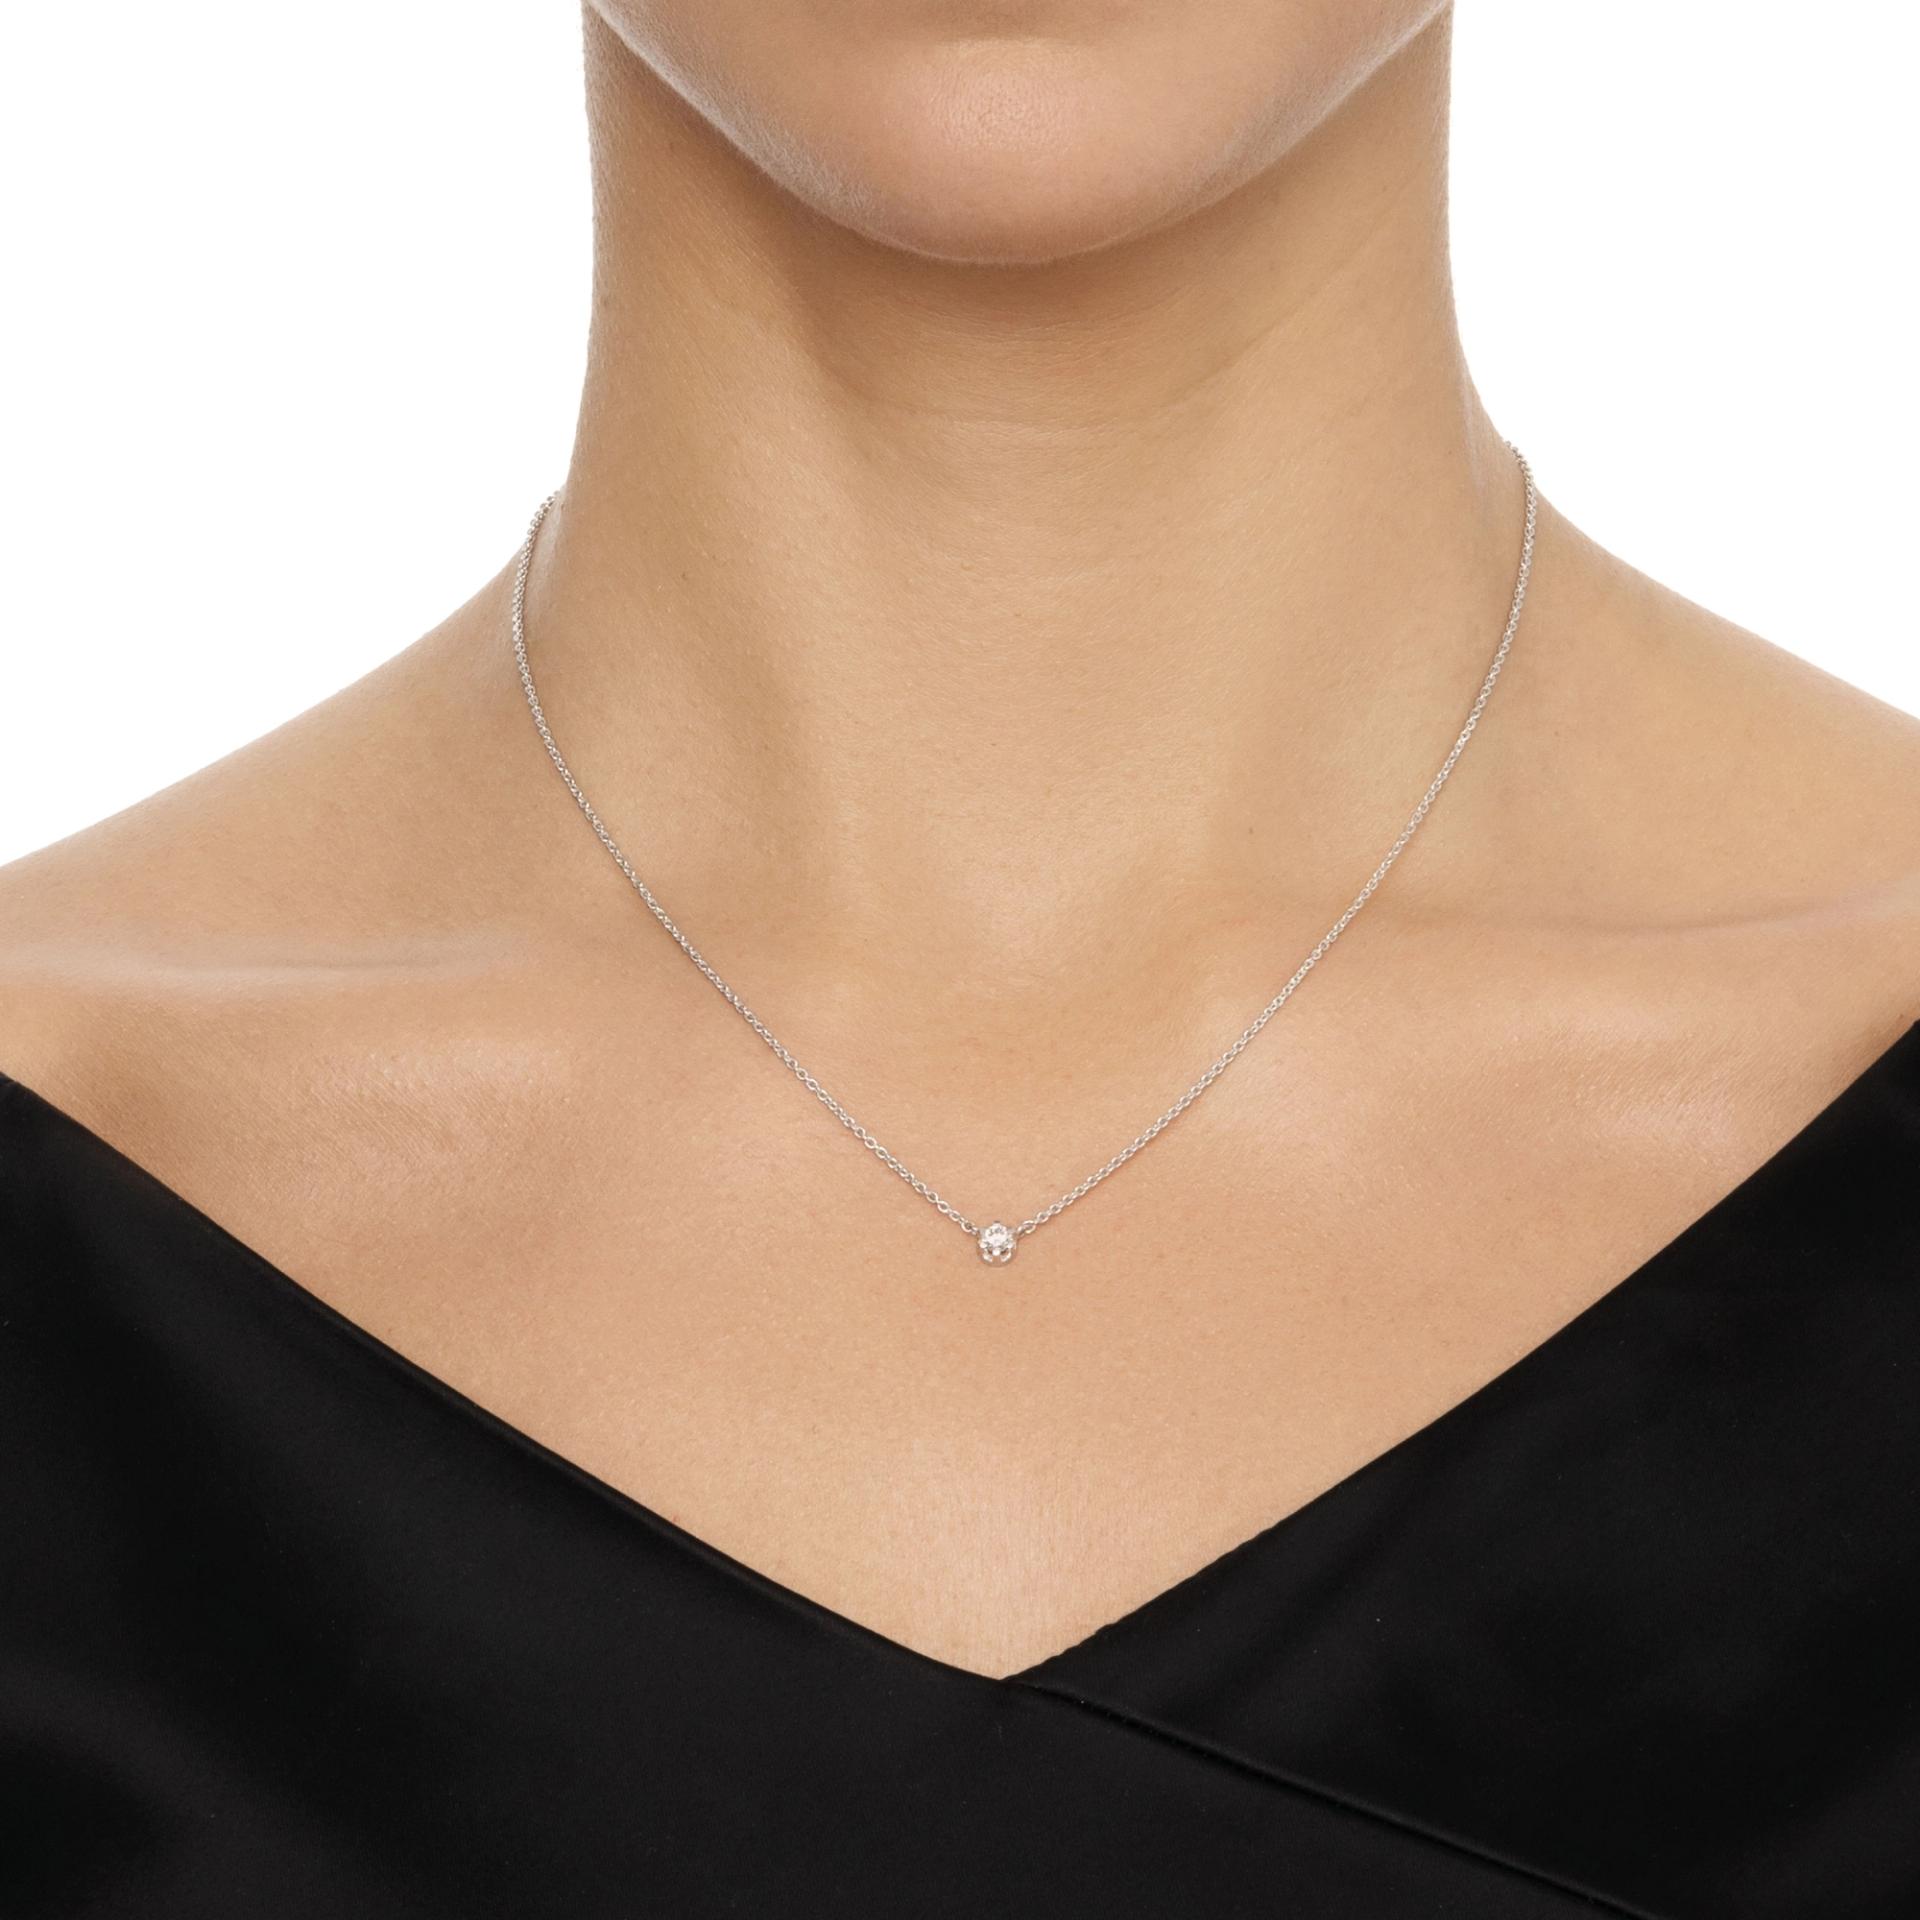 Crown & Stars Necklace 0.19 ct